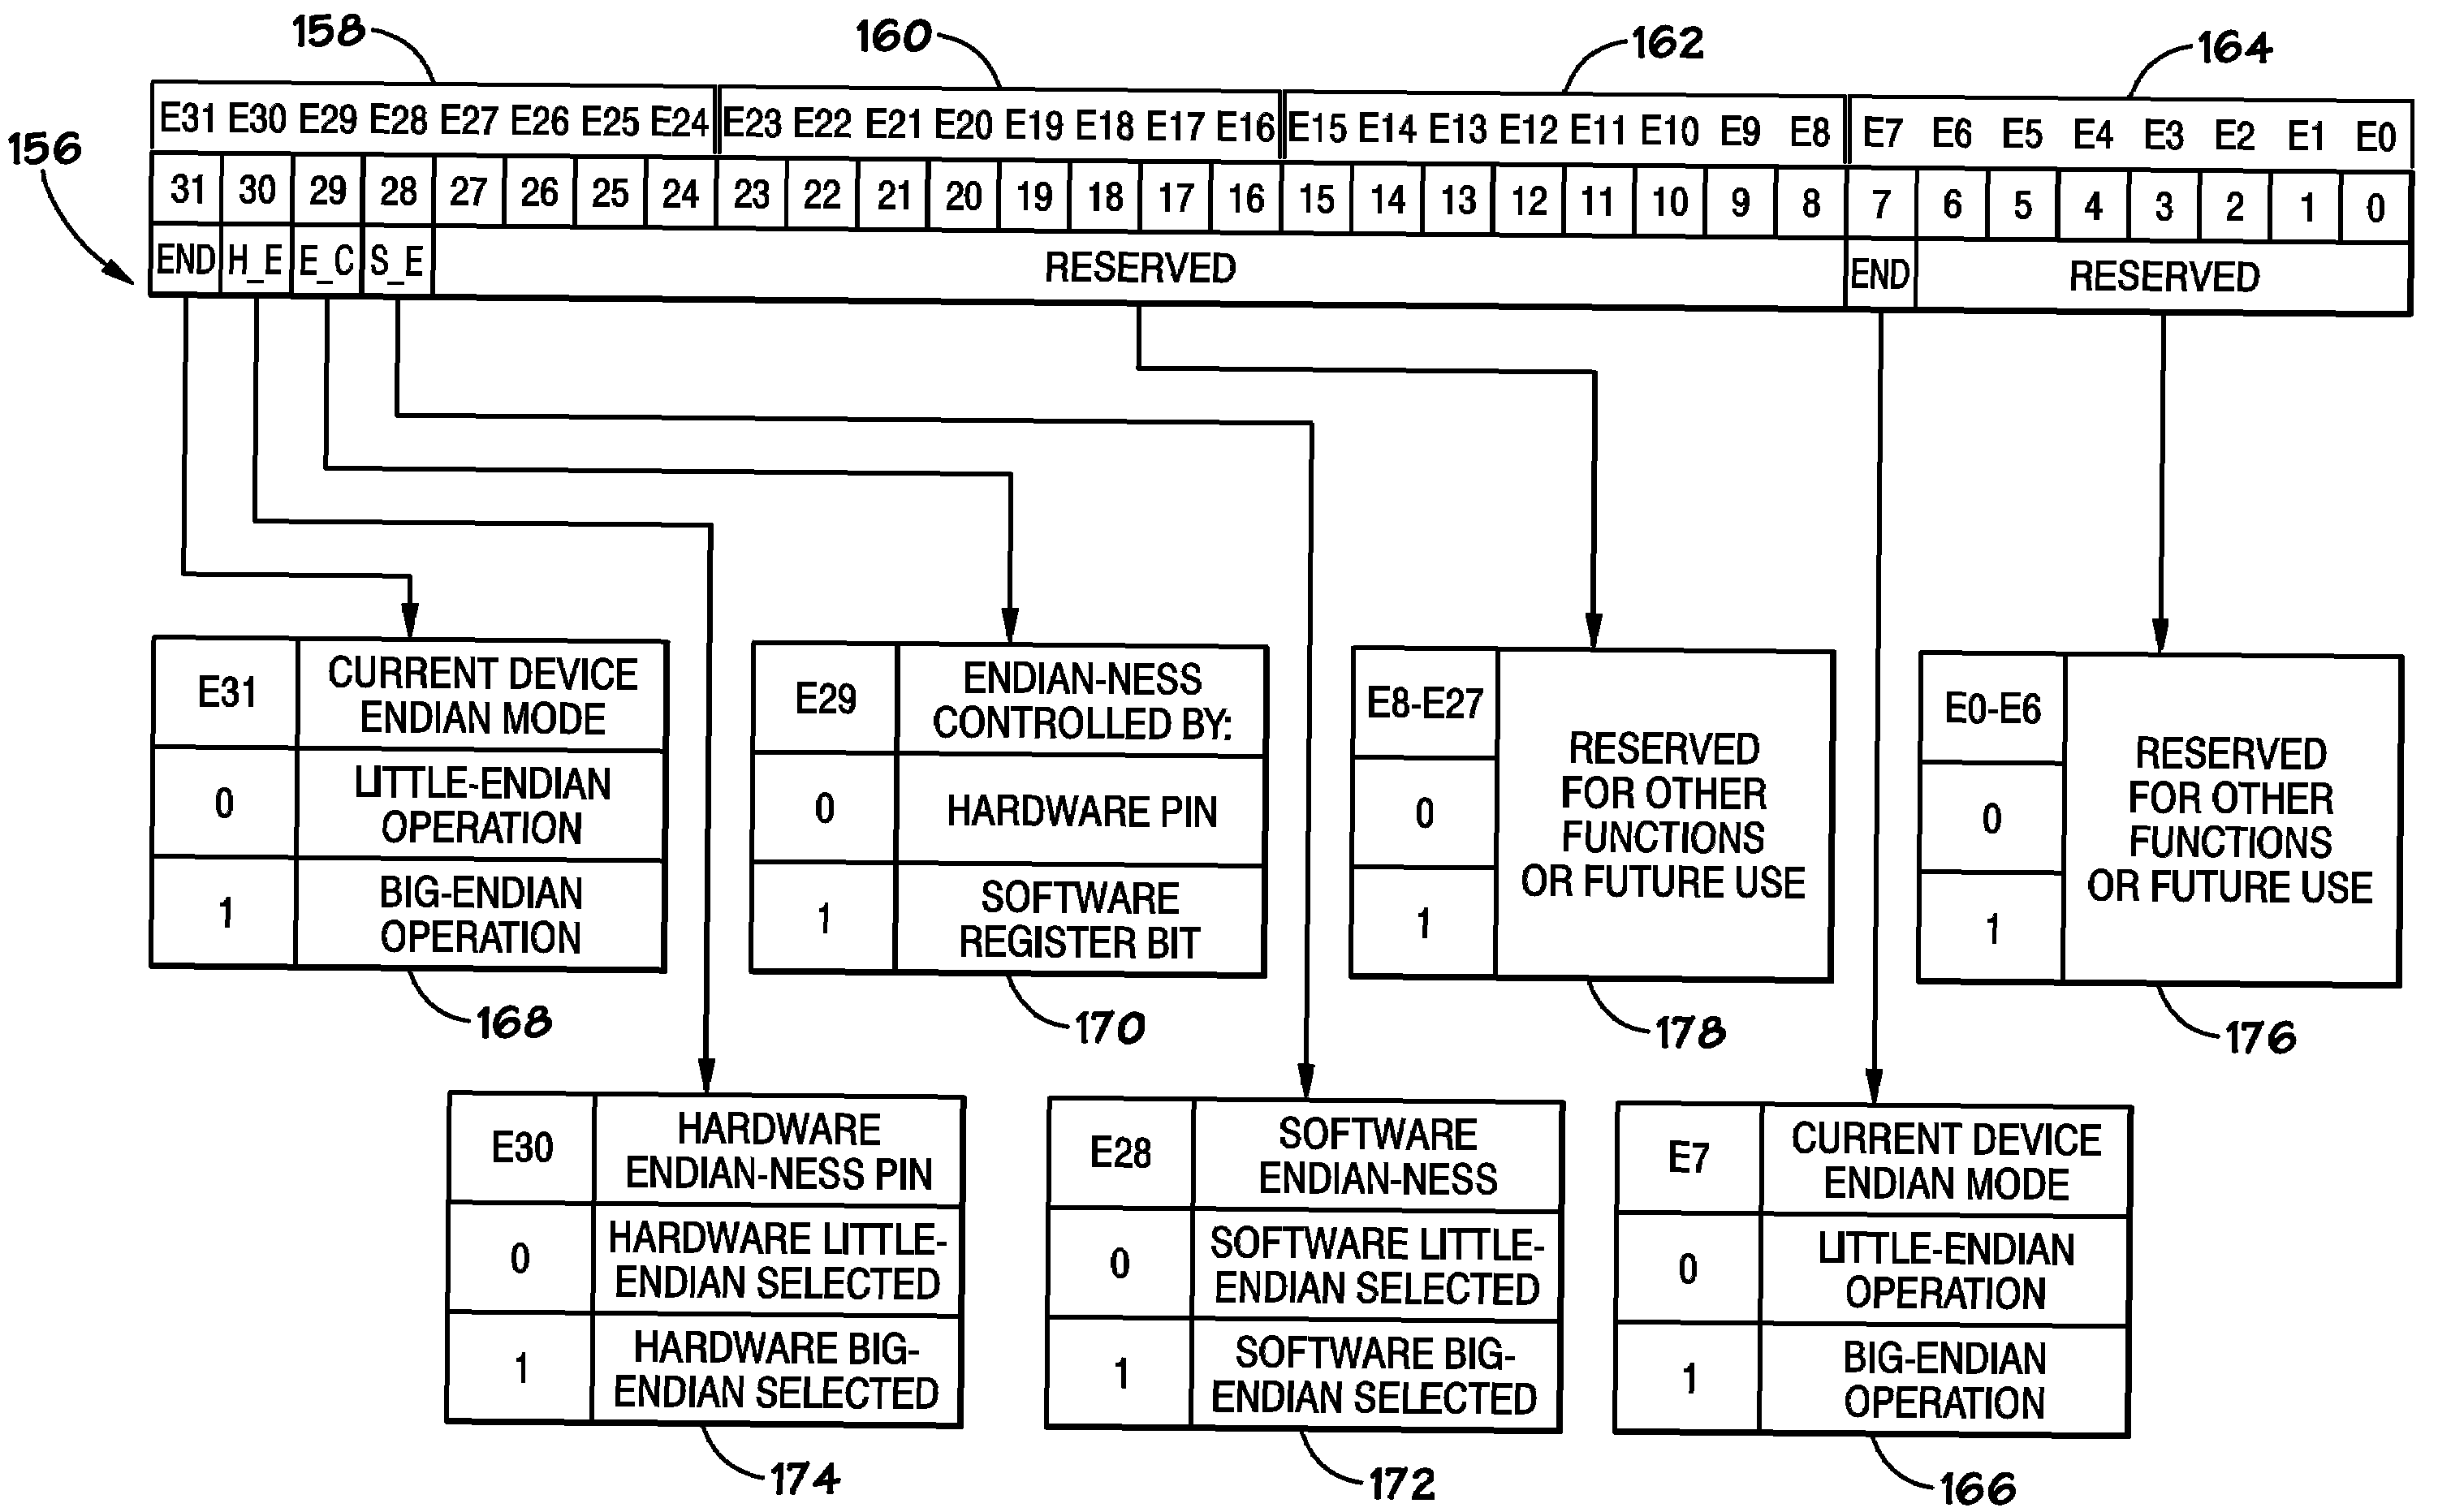 Systems and Methods for Managing Endian Mode of a Device